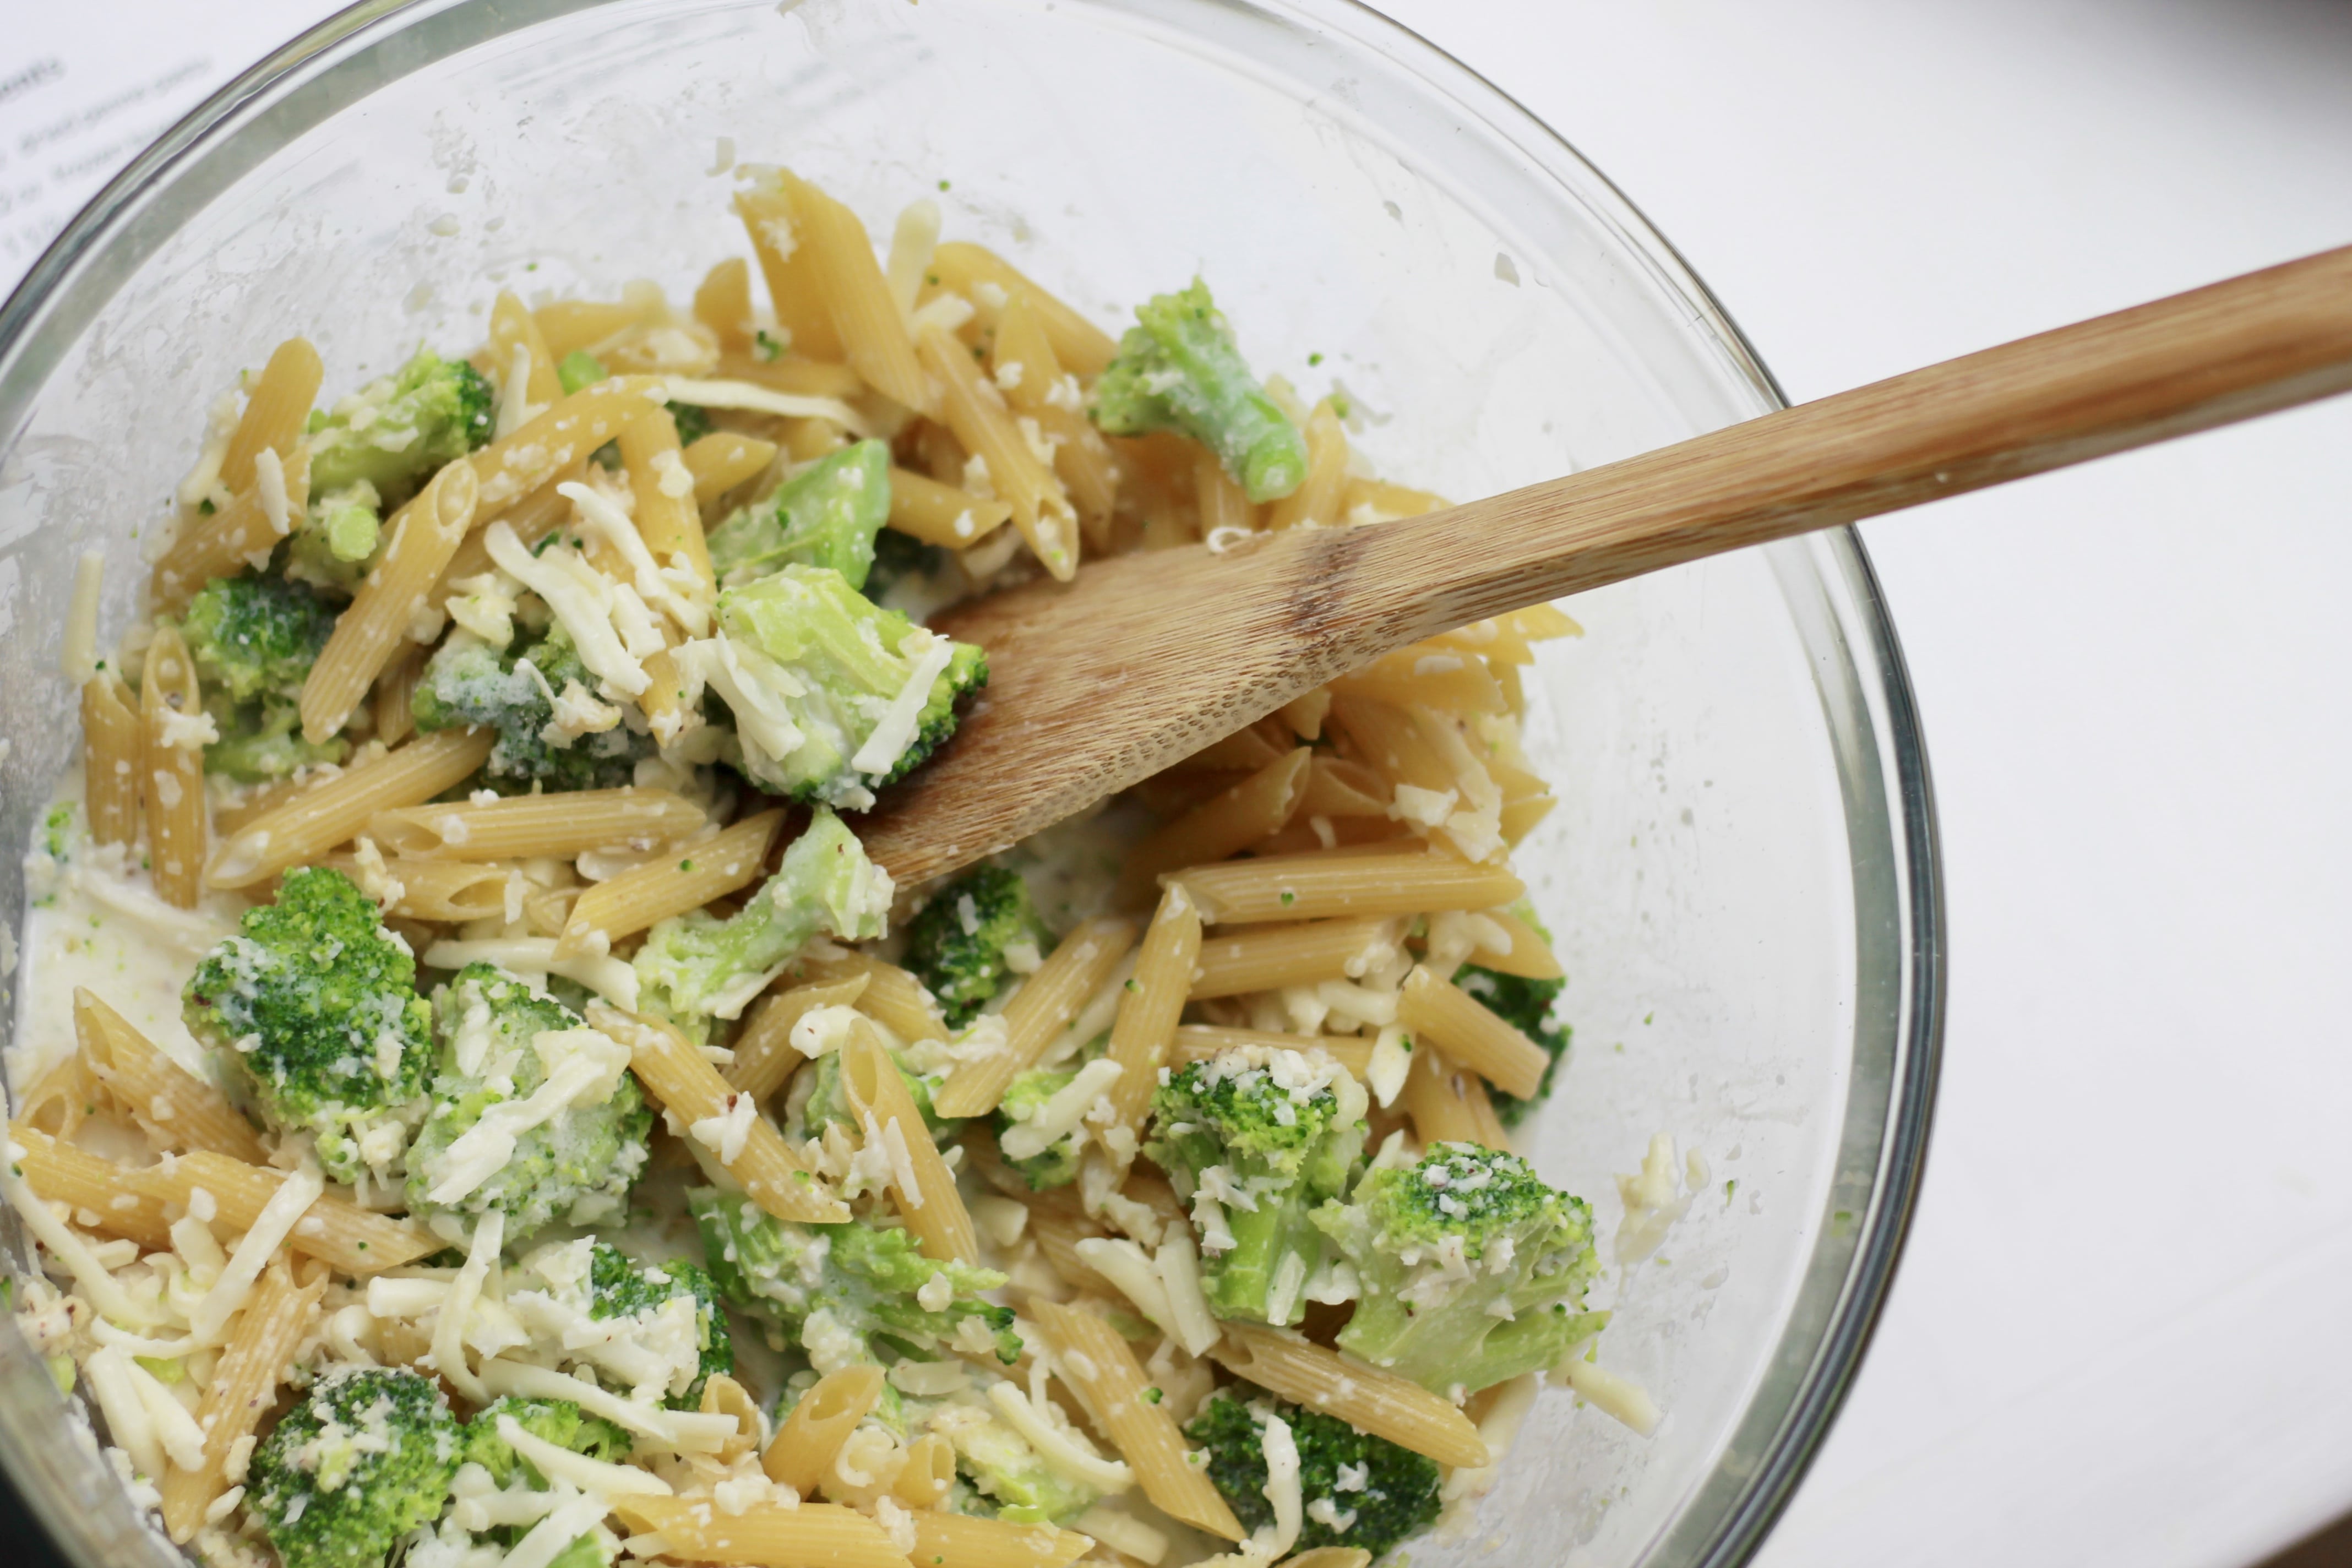 Broccoli, noodles and shredded cheese all mixed together in a clear bowl.